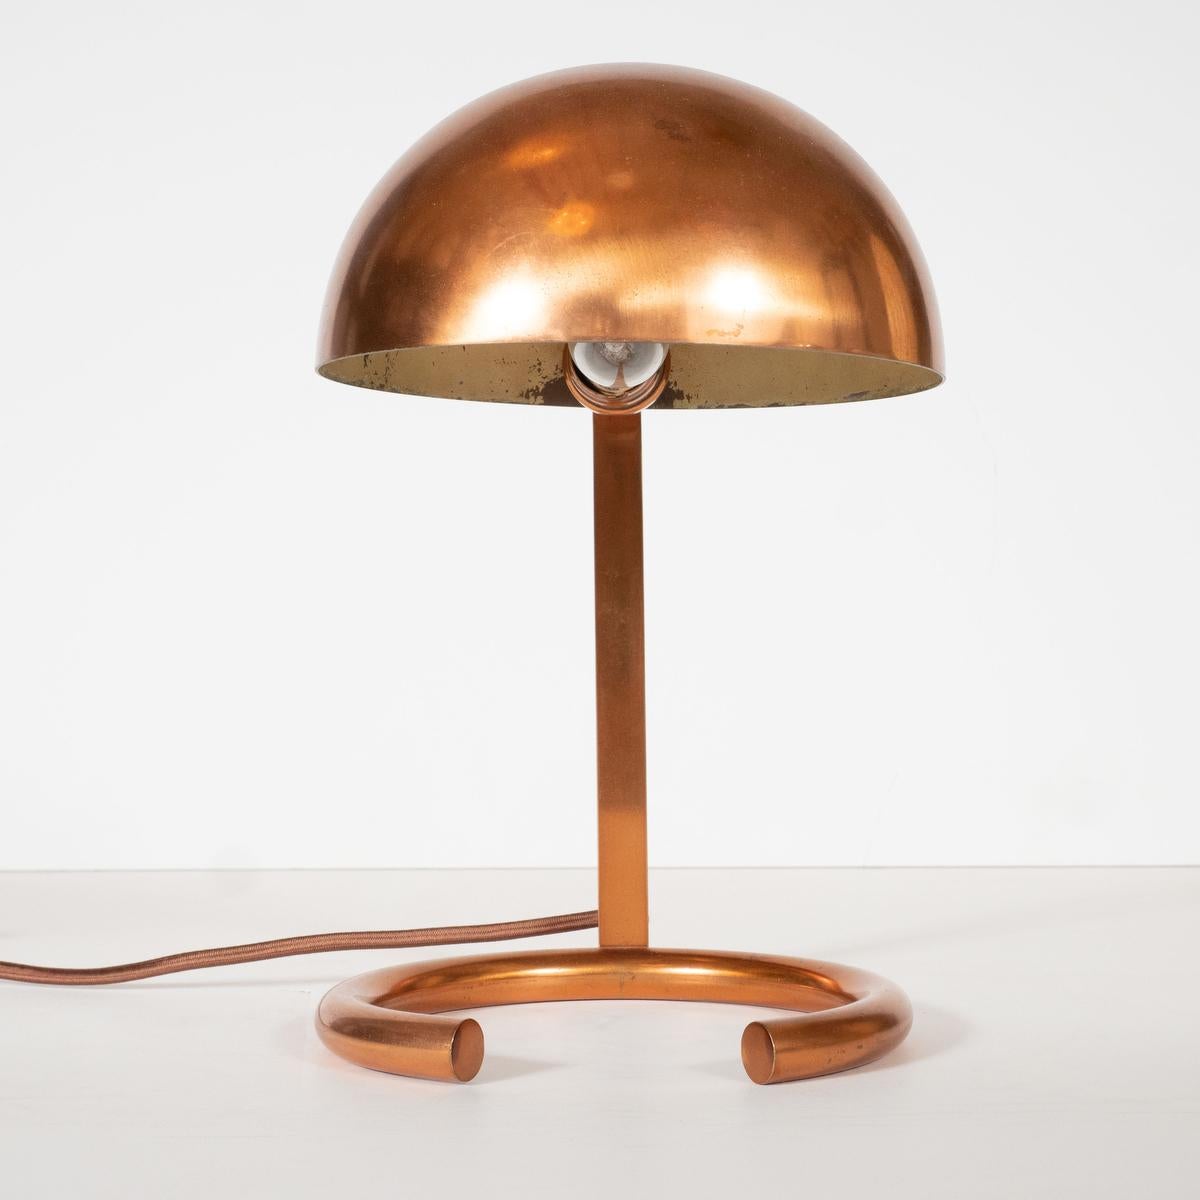  Modernist Copper Desk Lamp by Adnet In Good Condition For Sale In Tarrytown, NY